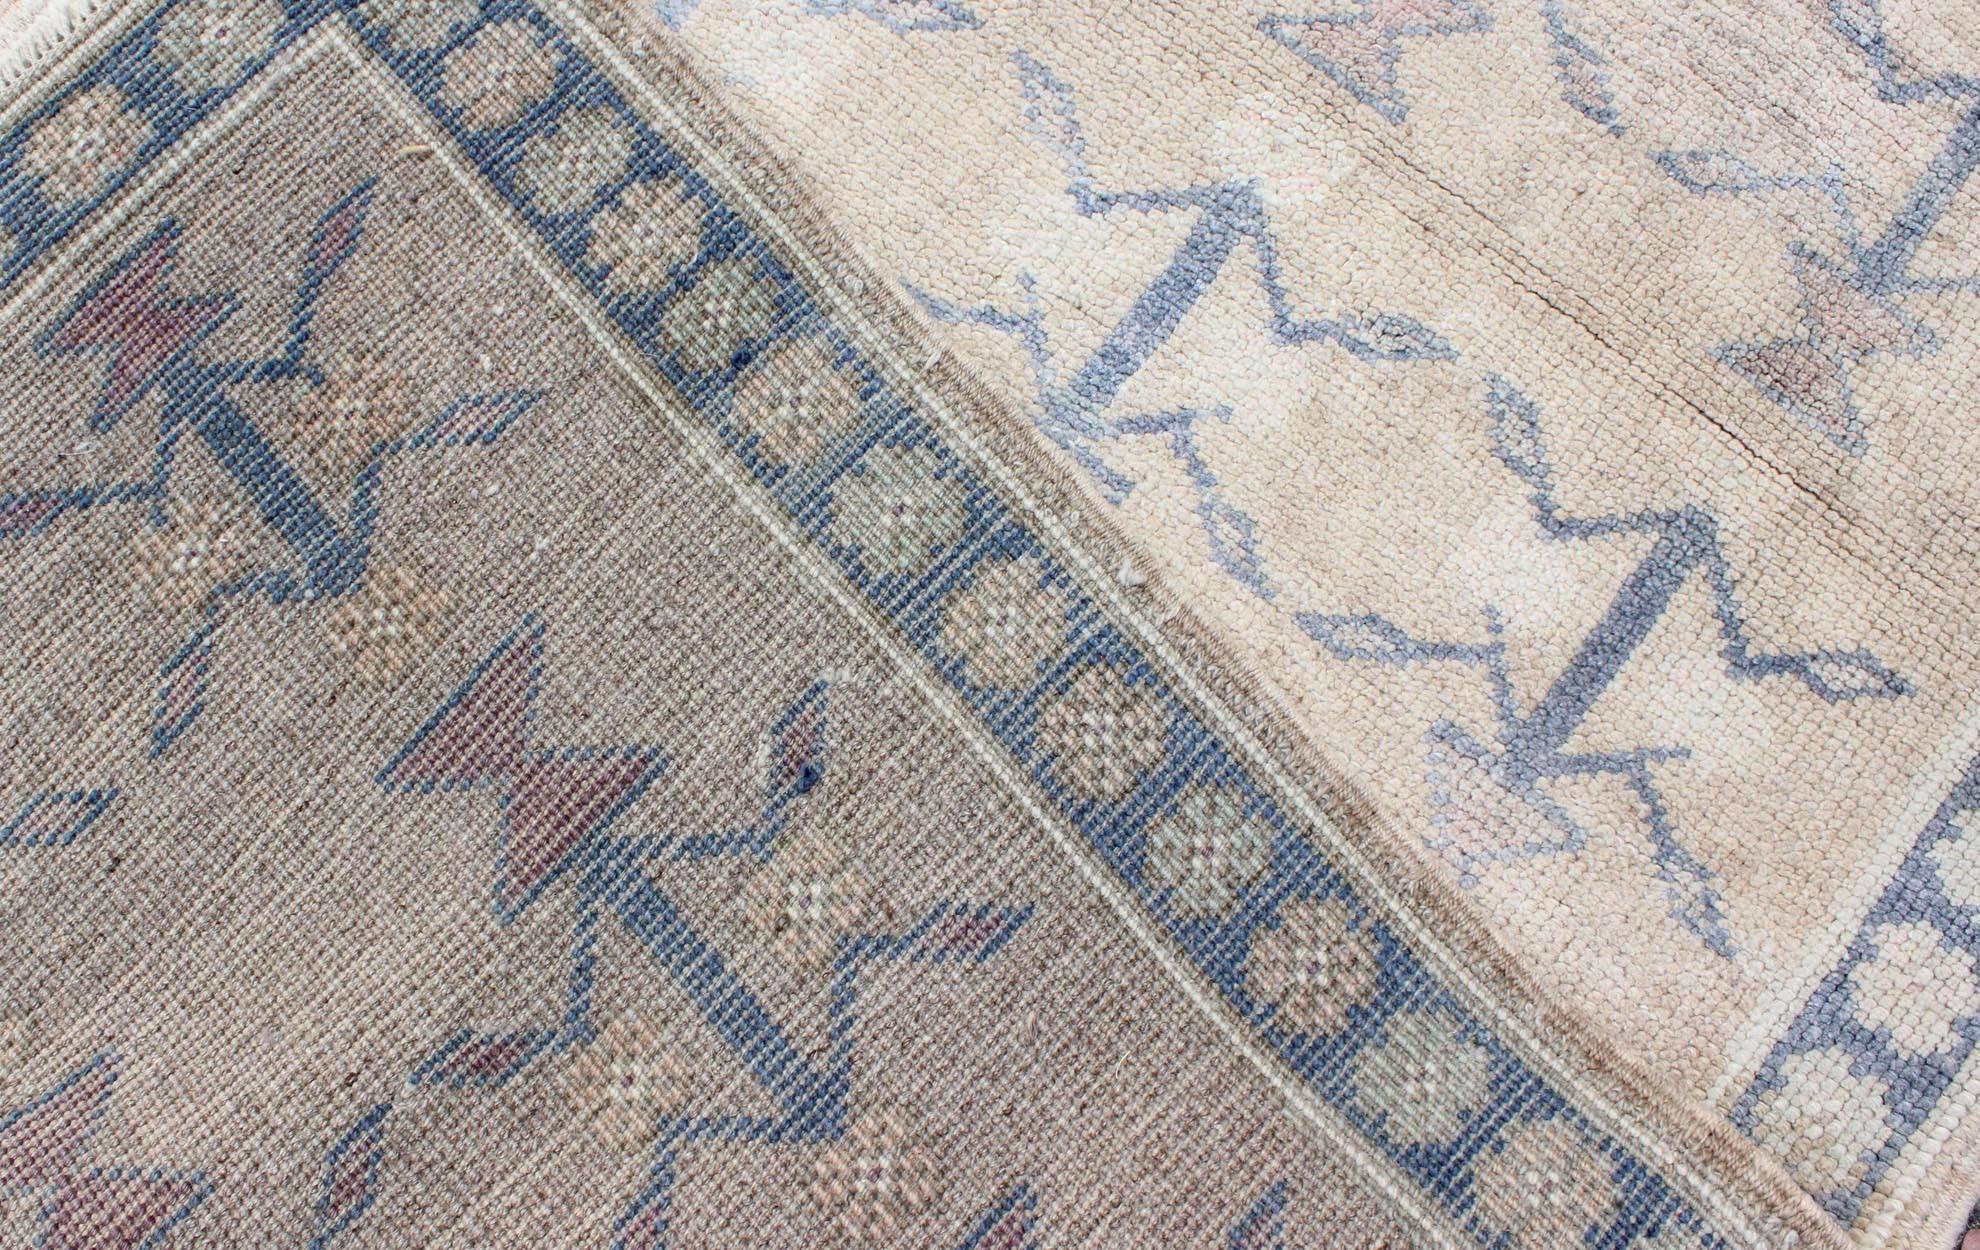 20th Century Small Turkish Tulu Carpet with Blue Tribal Motifs in a Sand-Colored Field